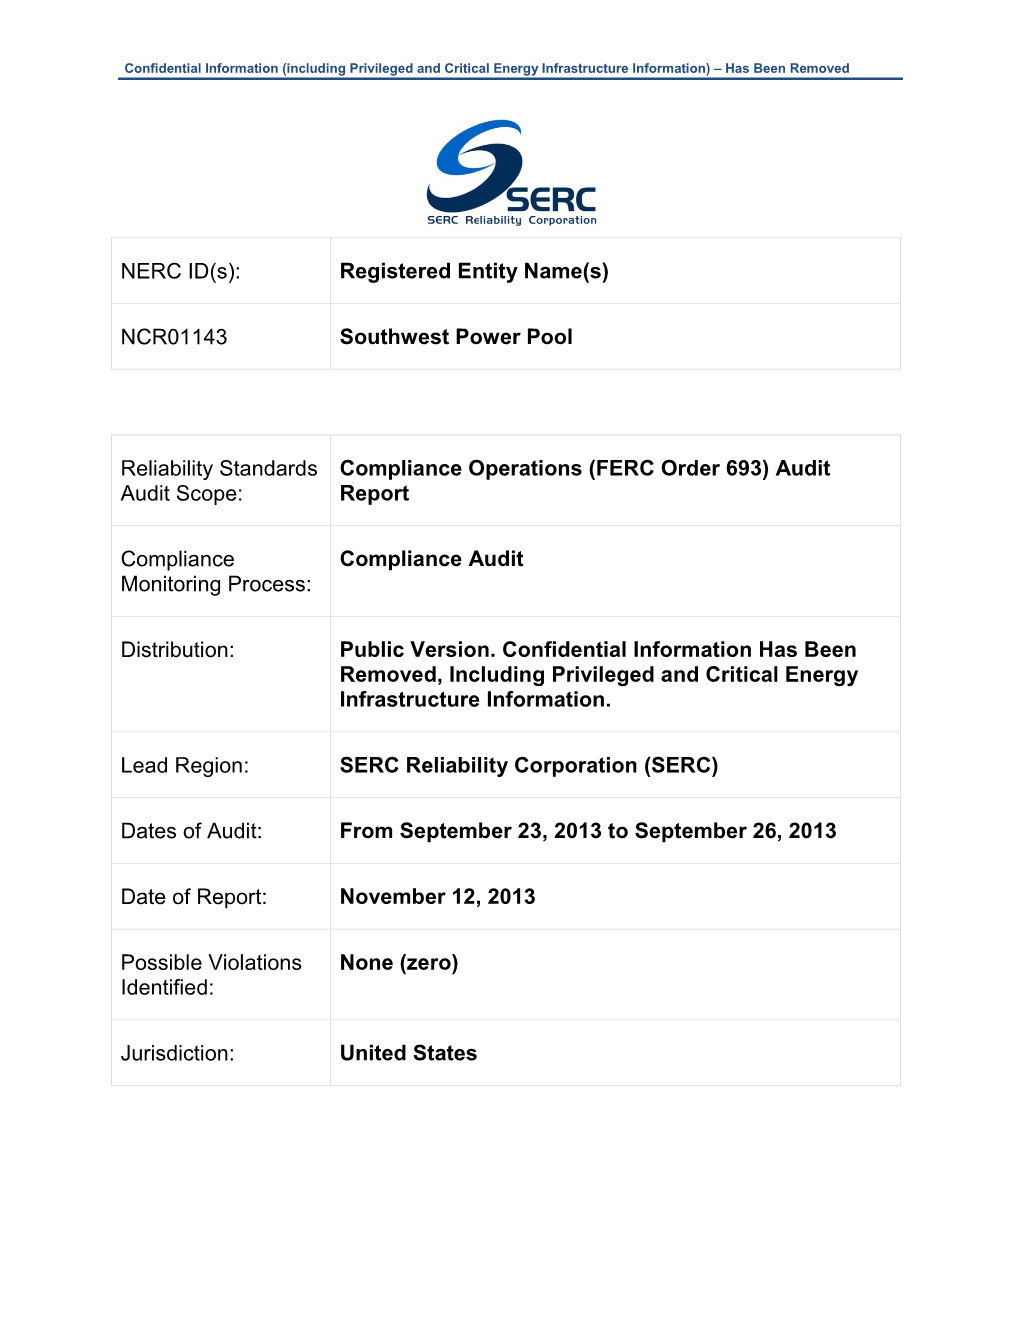 NCR01143 Southwest Power Pool Reliability Standards Audit Scope